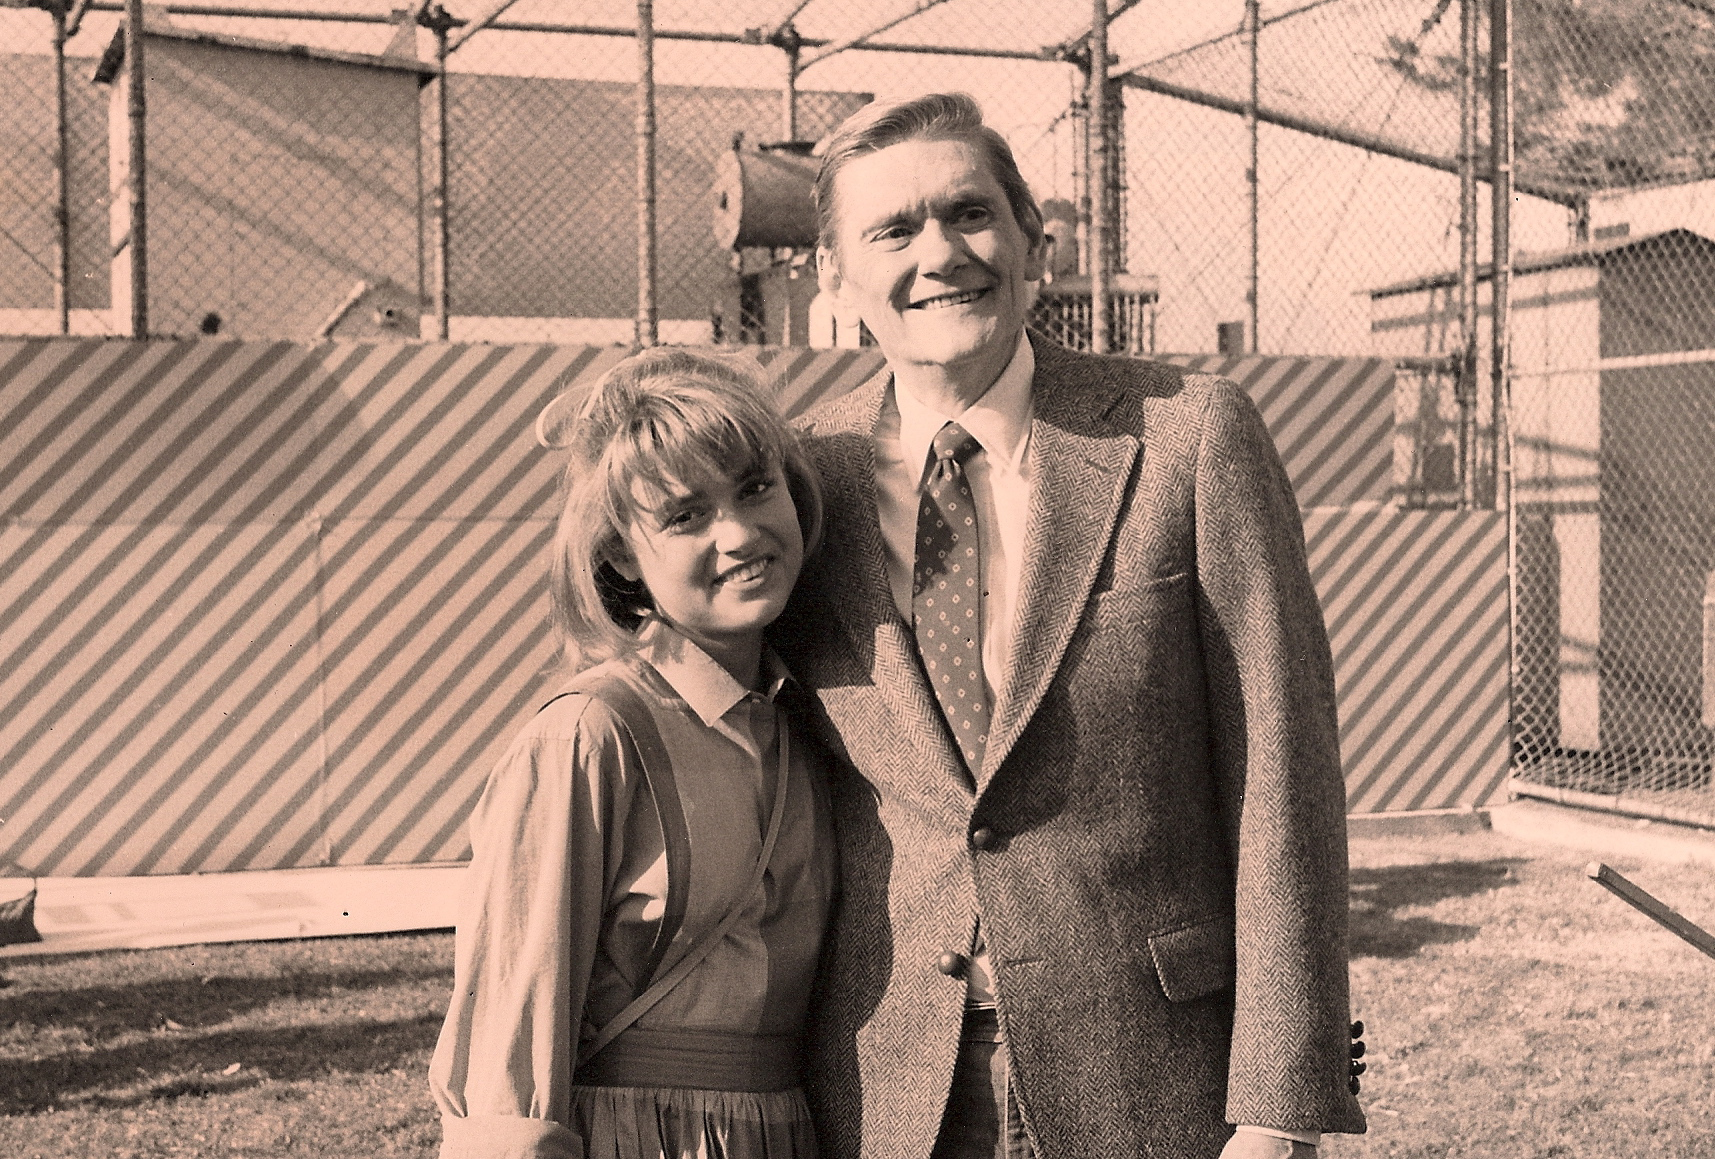 JoAnn Willette with Dick York in HIGH SCHOOL USA